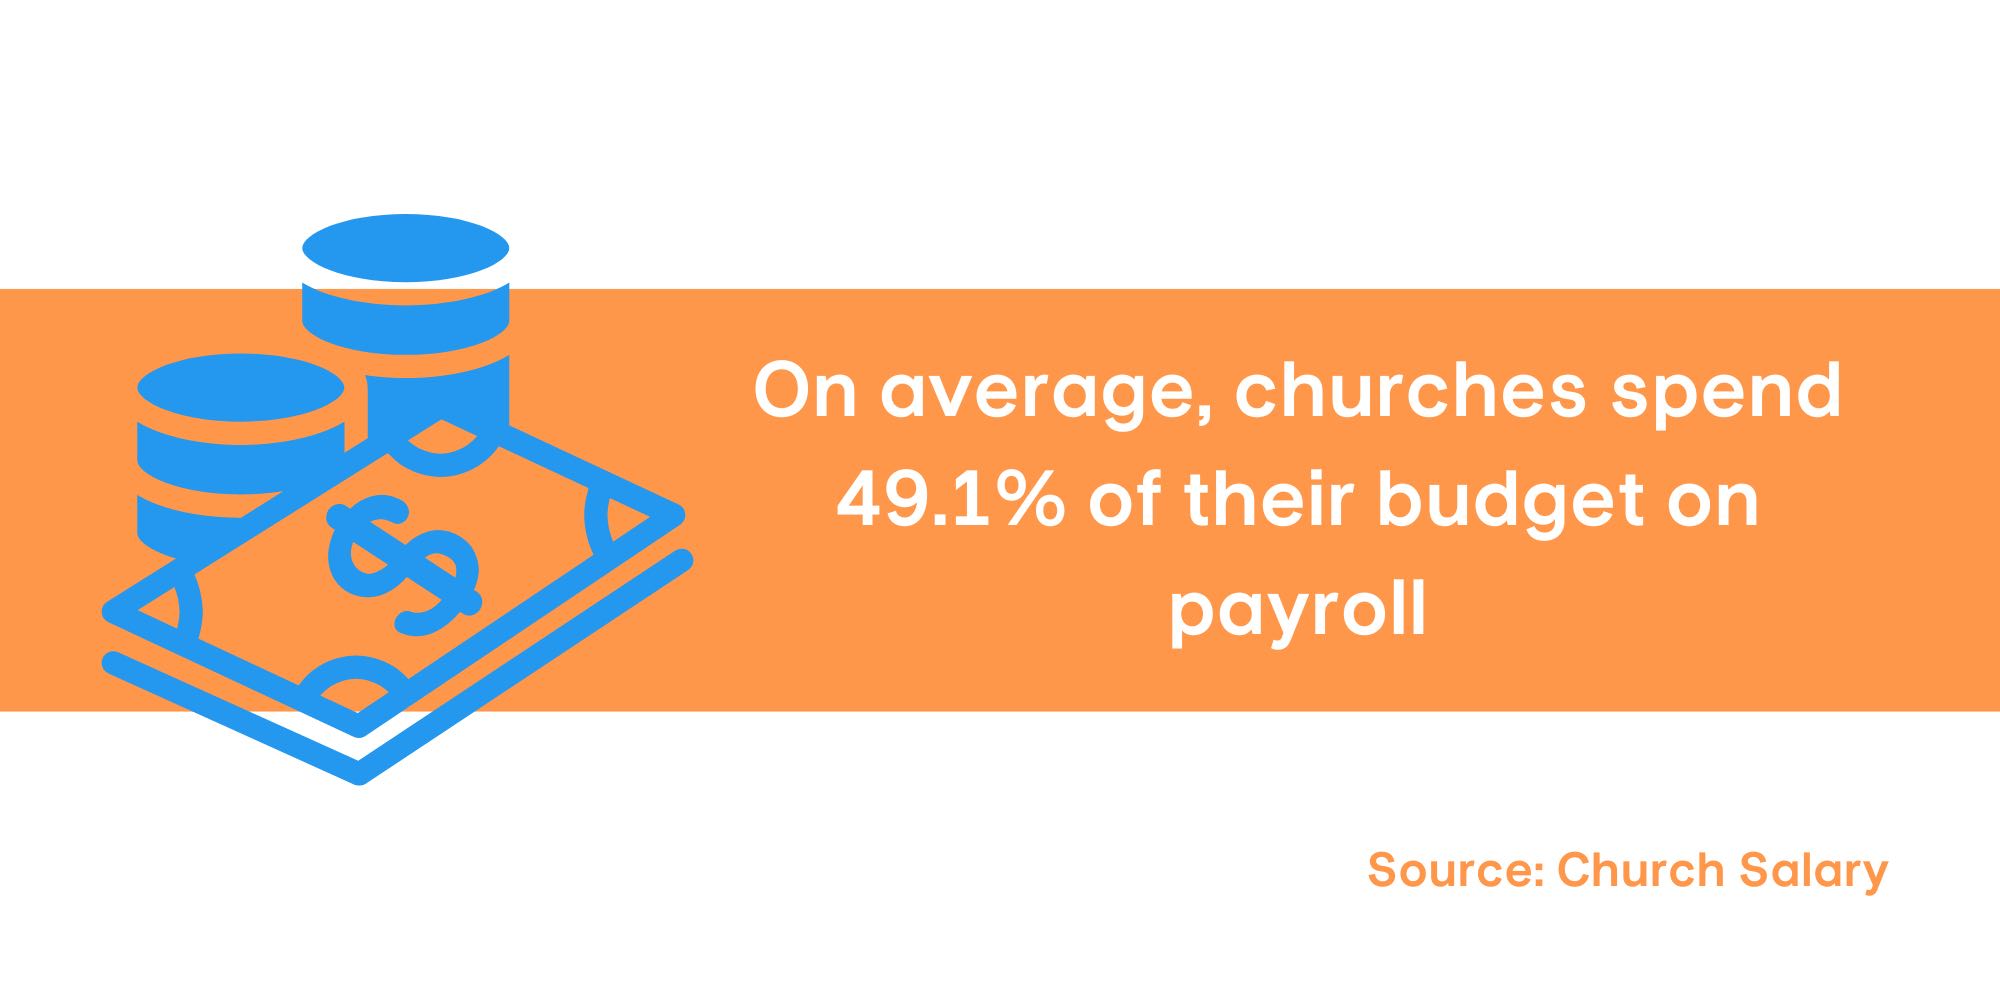 On average, churches spend 49.1% of their income on staff salaries